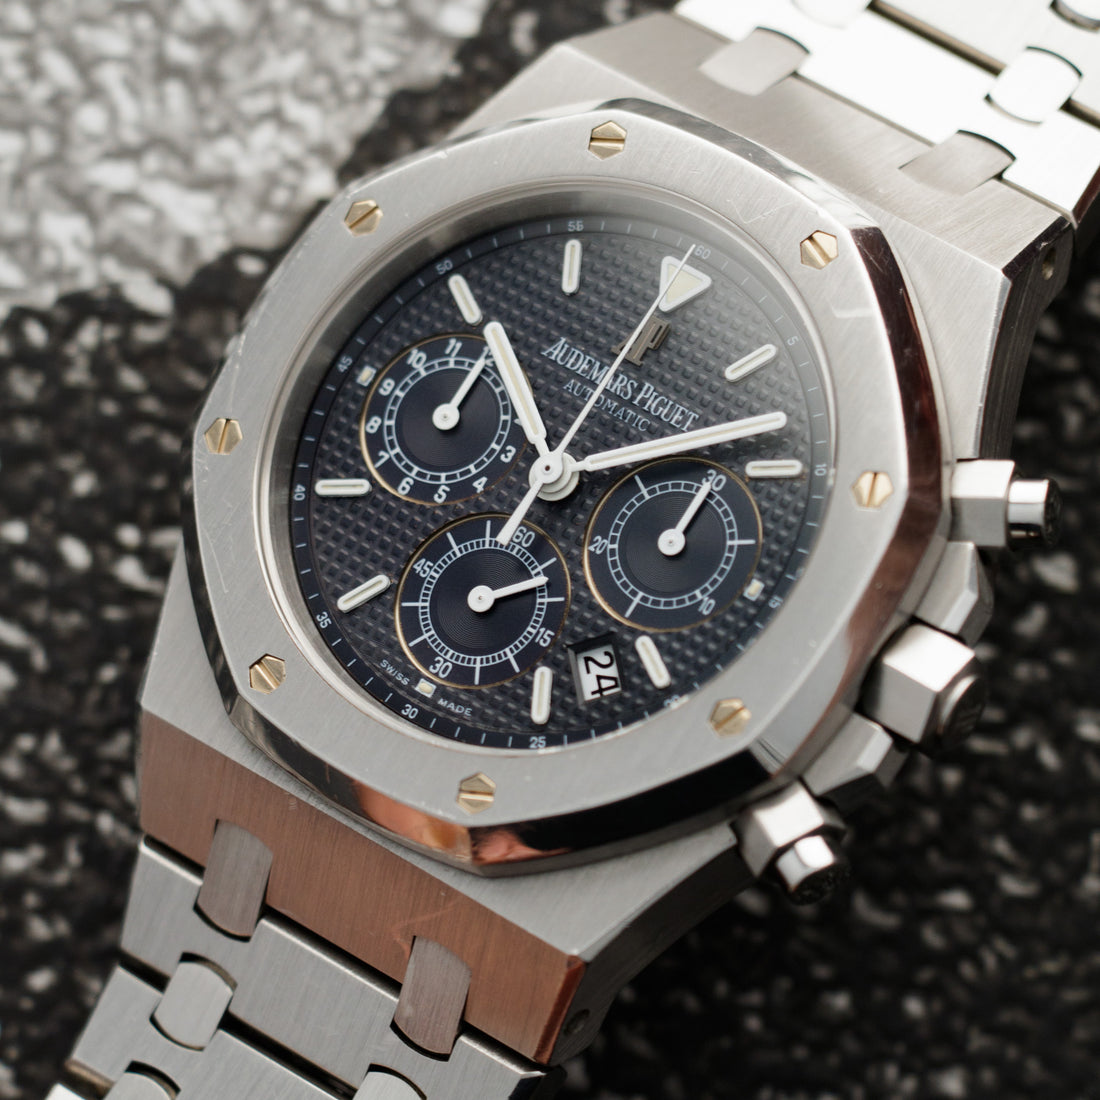 Top Tips on How to Sell Your Audemars Piguet